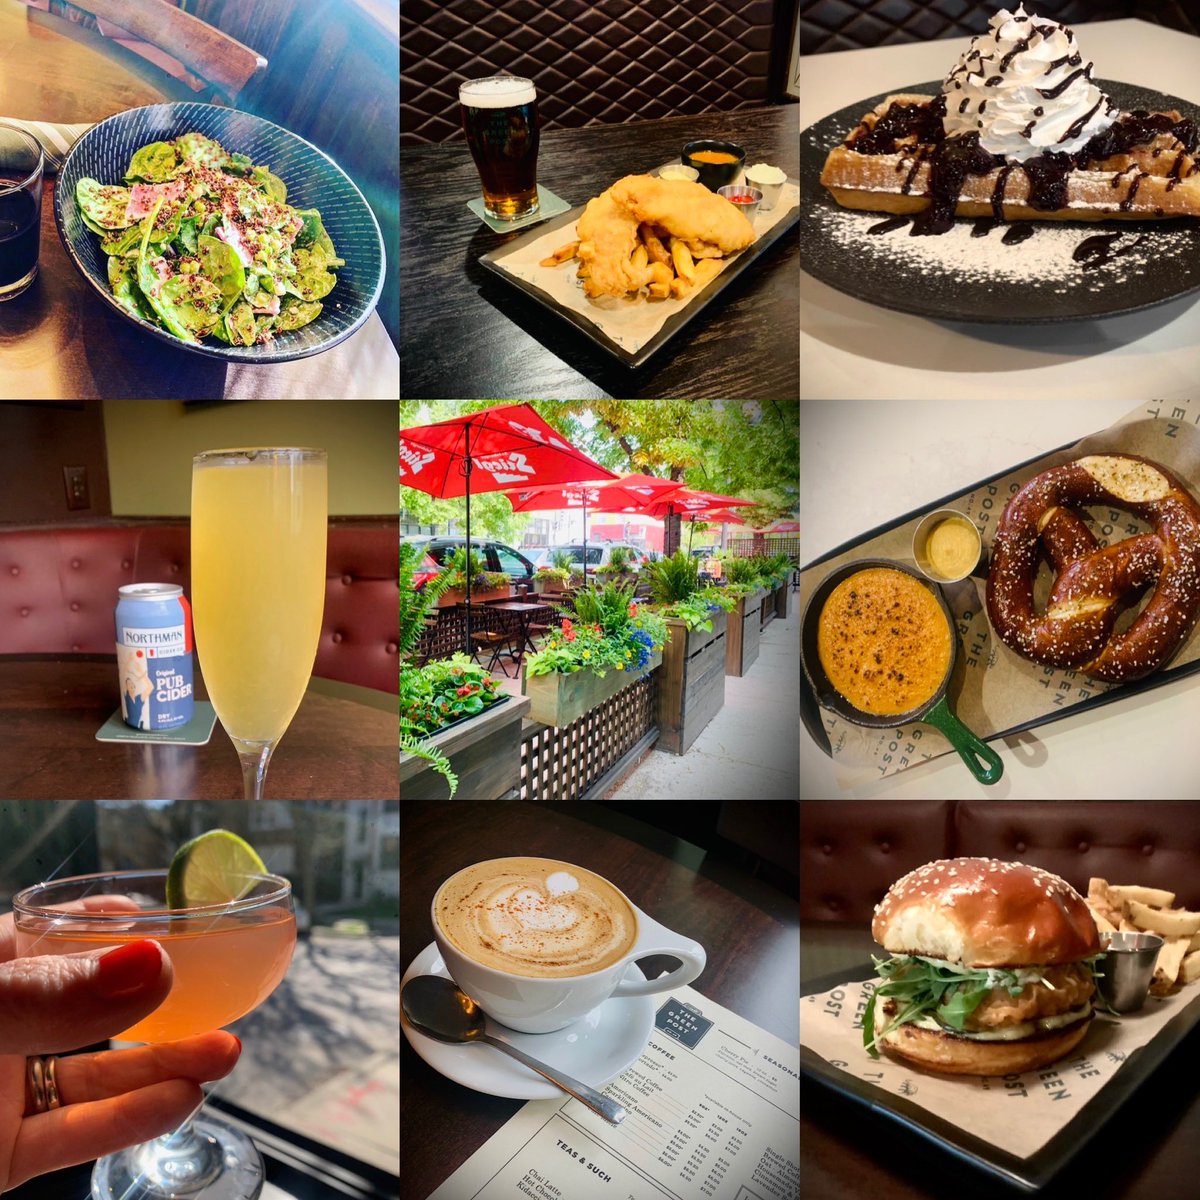 Just a few reasons to spend a little of your Memorial Day Weekend with us this weekend! 

CAFE ➡️ PUB ➡️ PATIO ☀️

#greenpostcafe #greenpostpub #lincolnsquare #patiosofinstagram #patiosofchicago #memorialday #memorialdayweekend